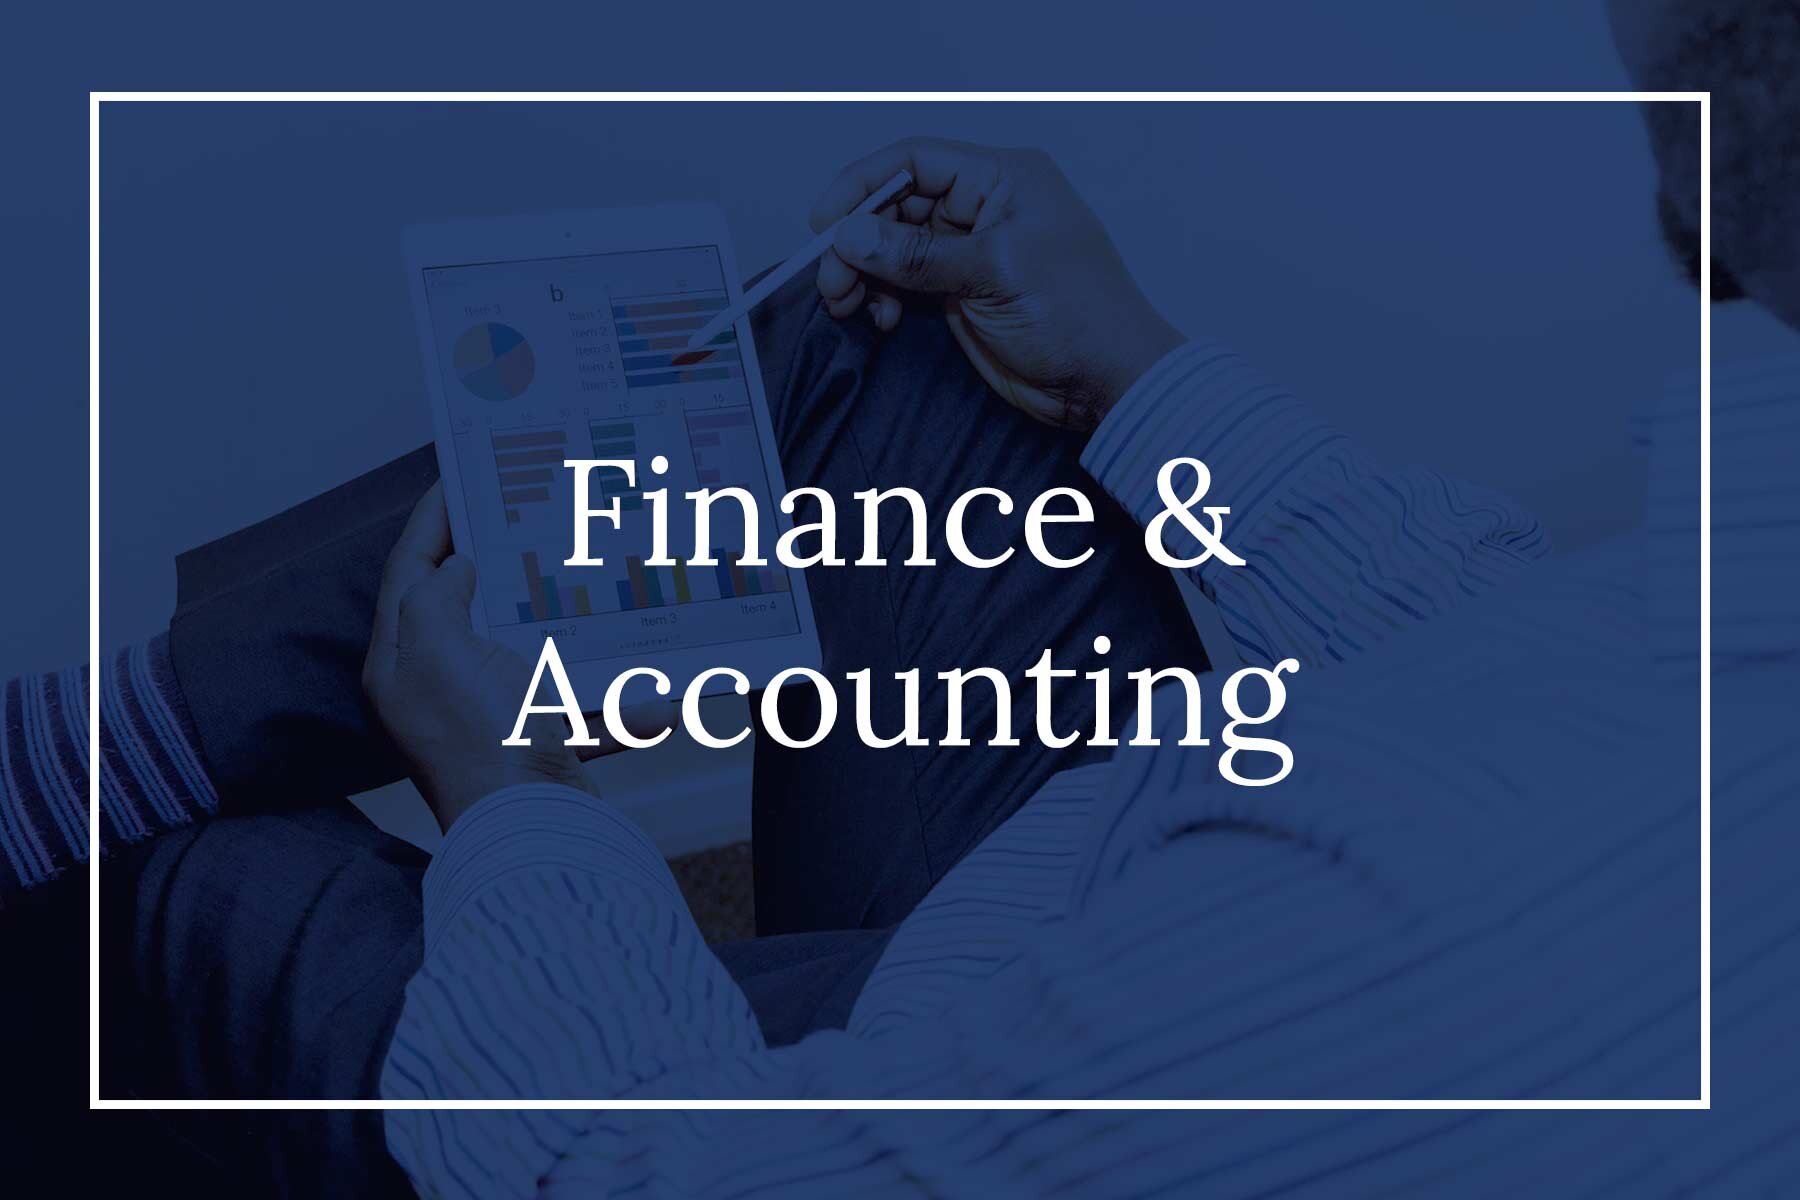 Finance and Accounting